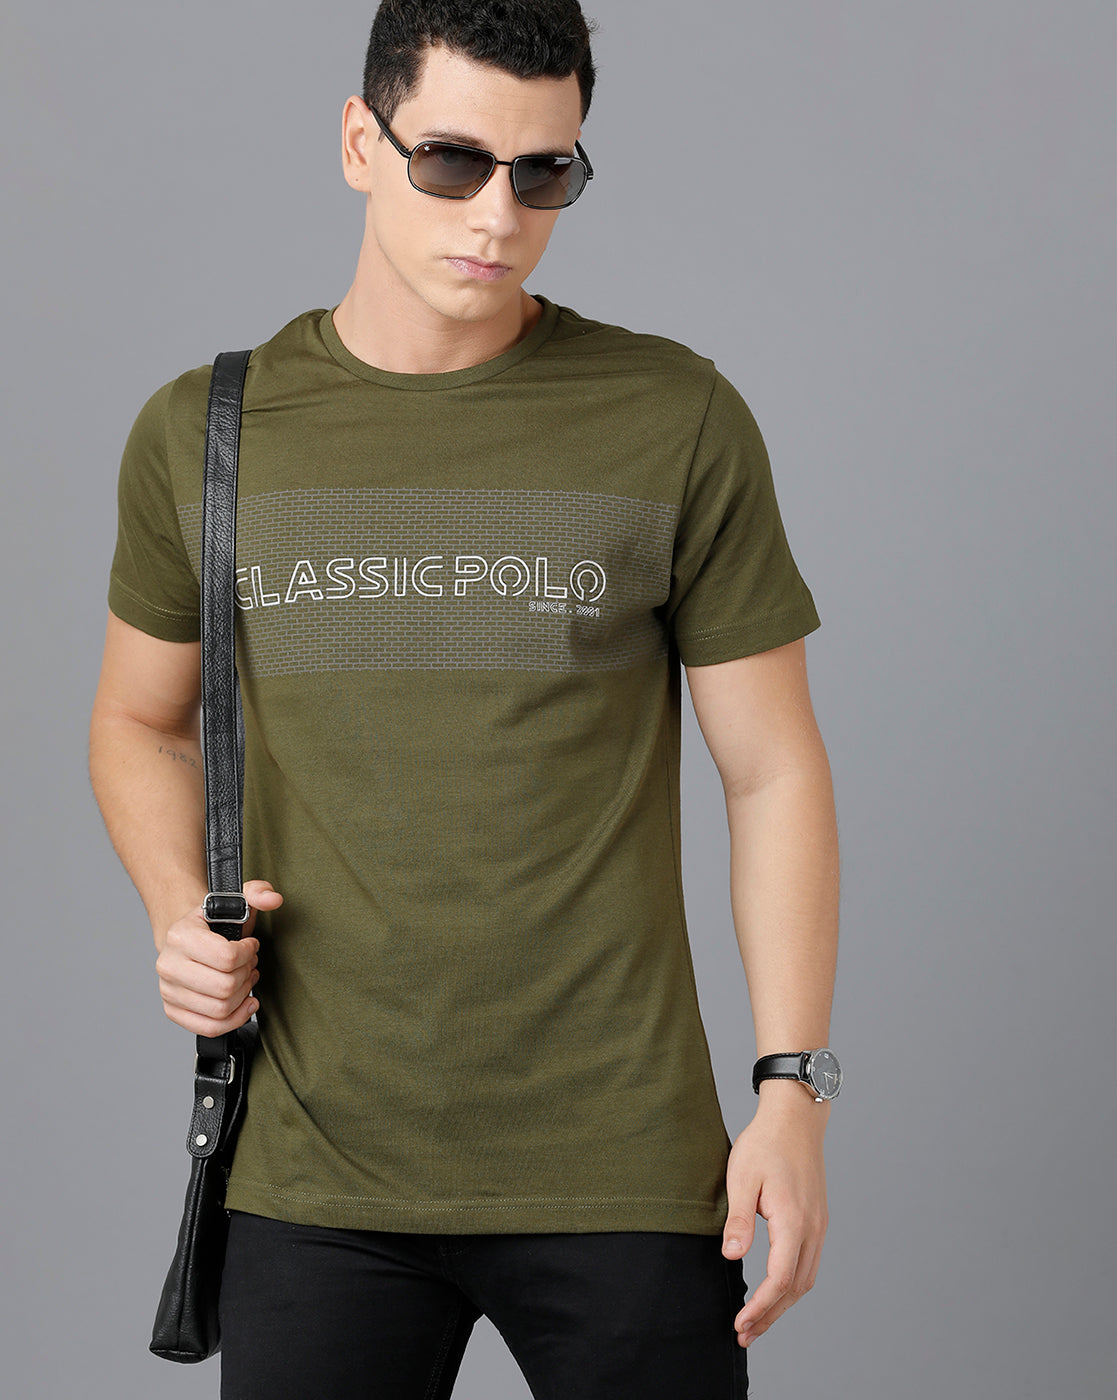 Classic Polo Mens Cotton Half Sleeve Printed Slim Fit Green Color Round Neck T-Shirt | Baleno - 451 B